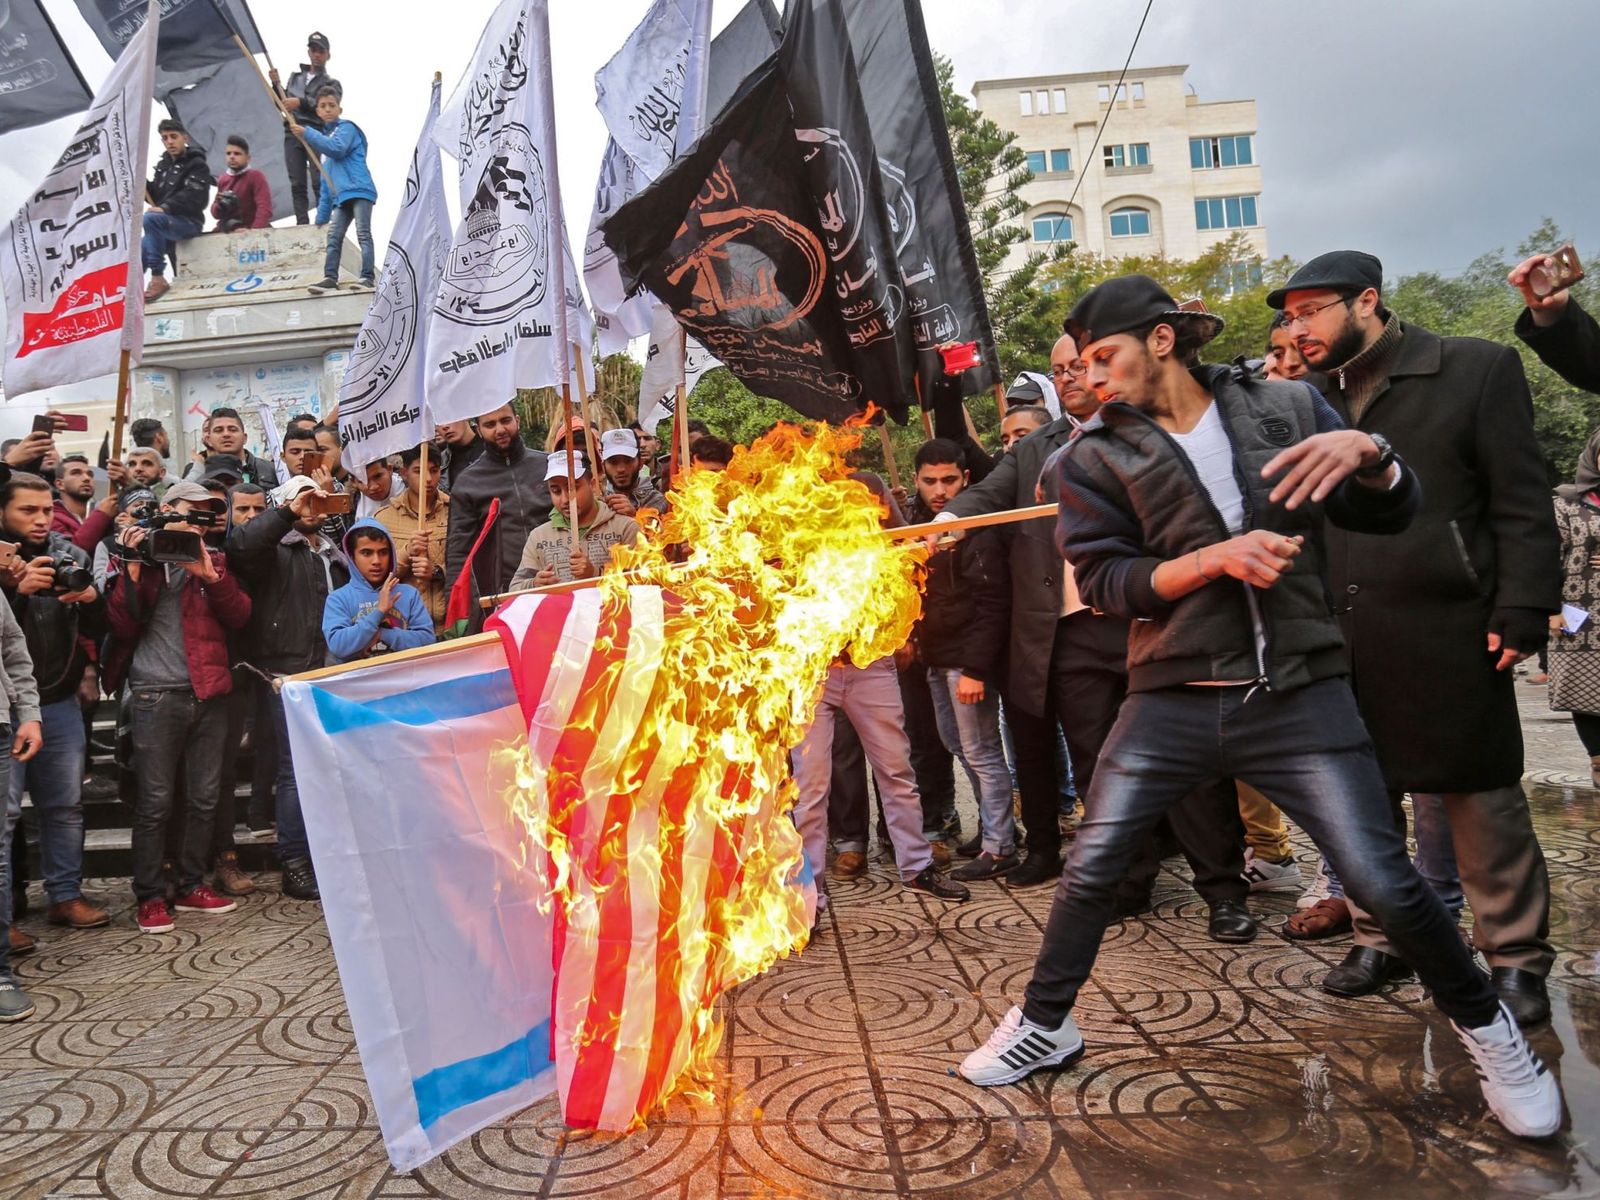 Palestinian protesters burn the US and Israeli flags in Gaza City